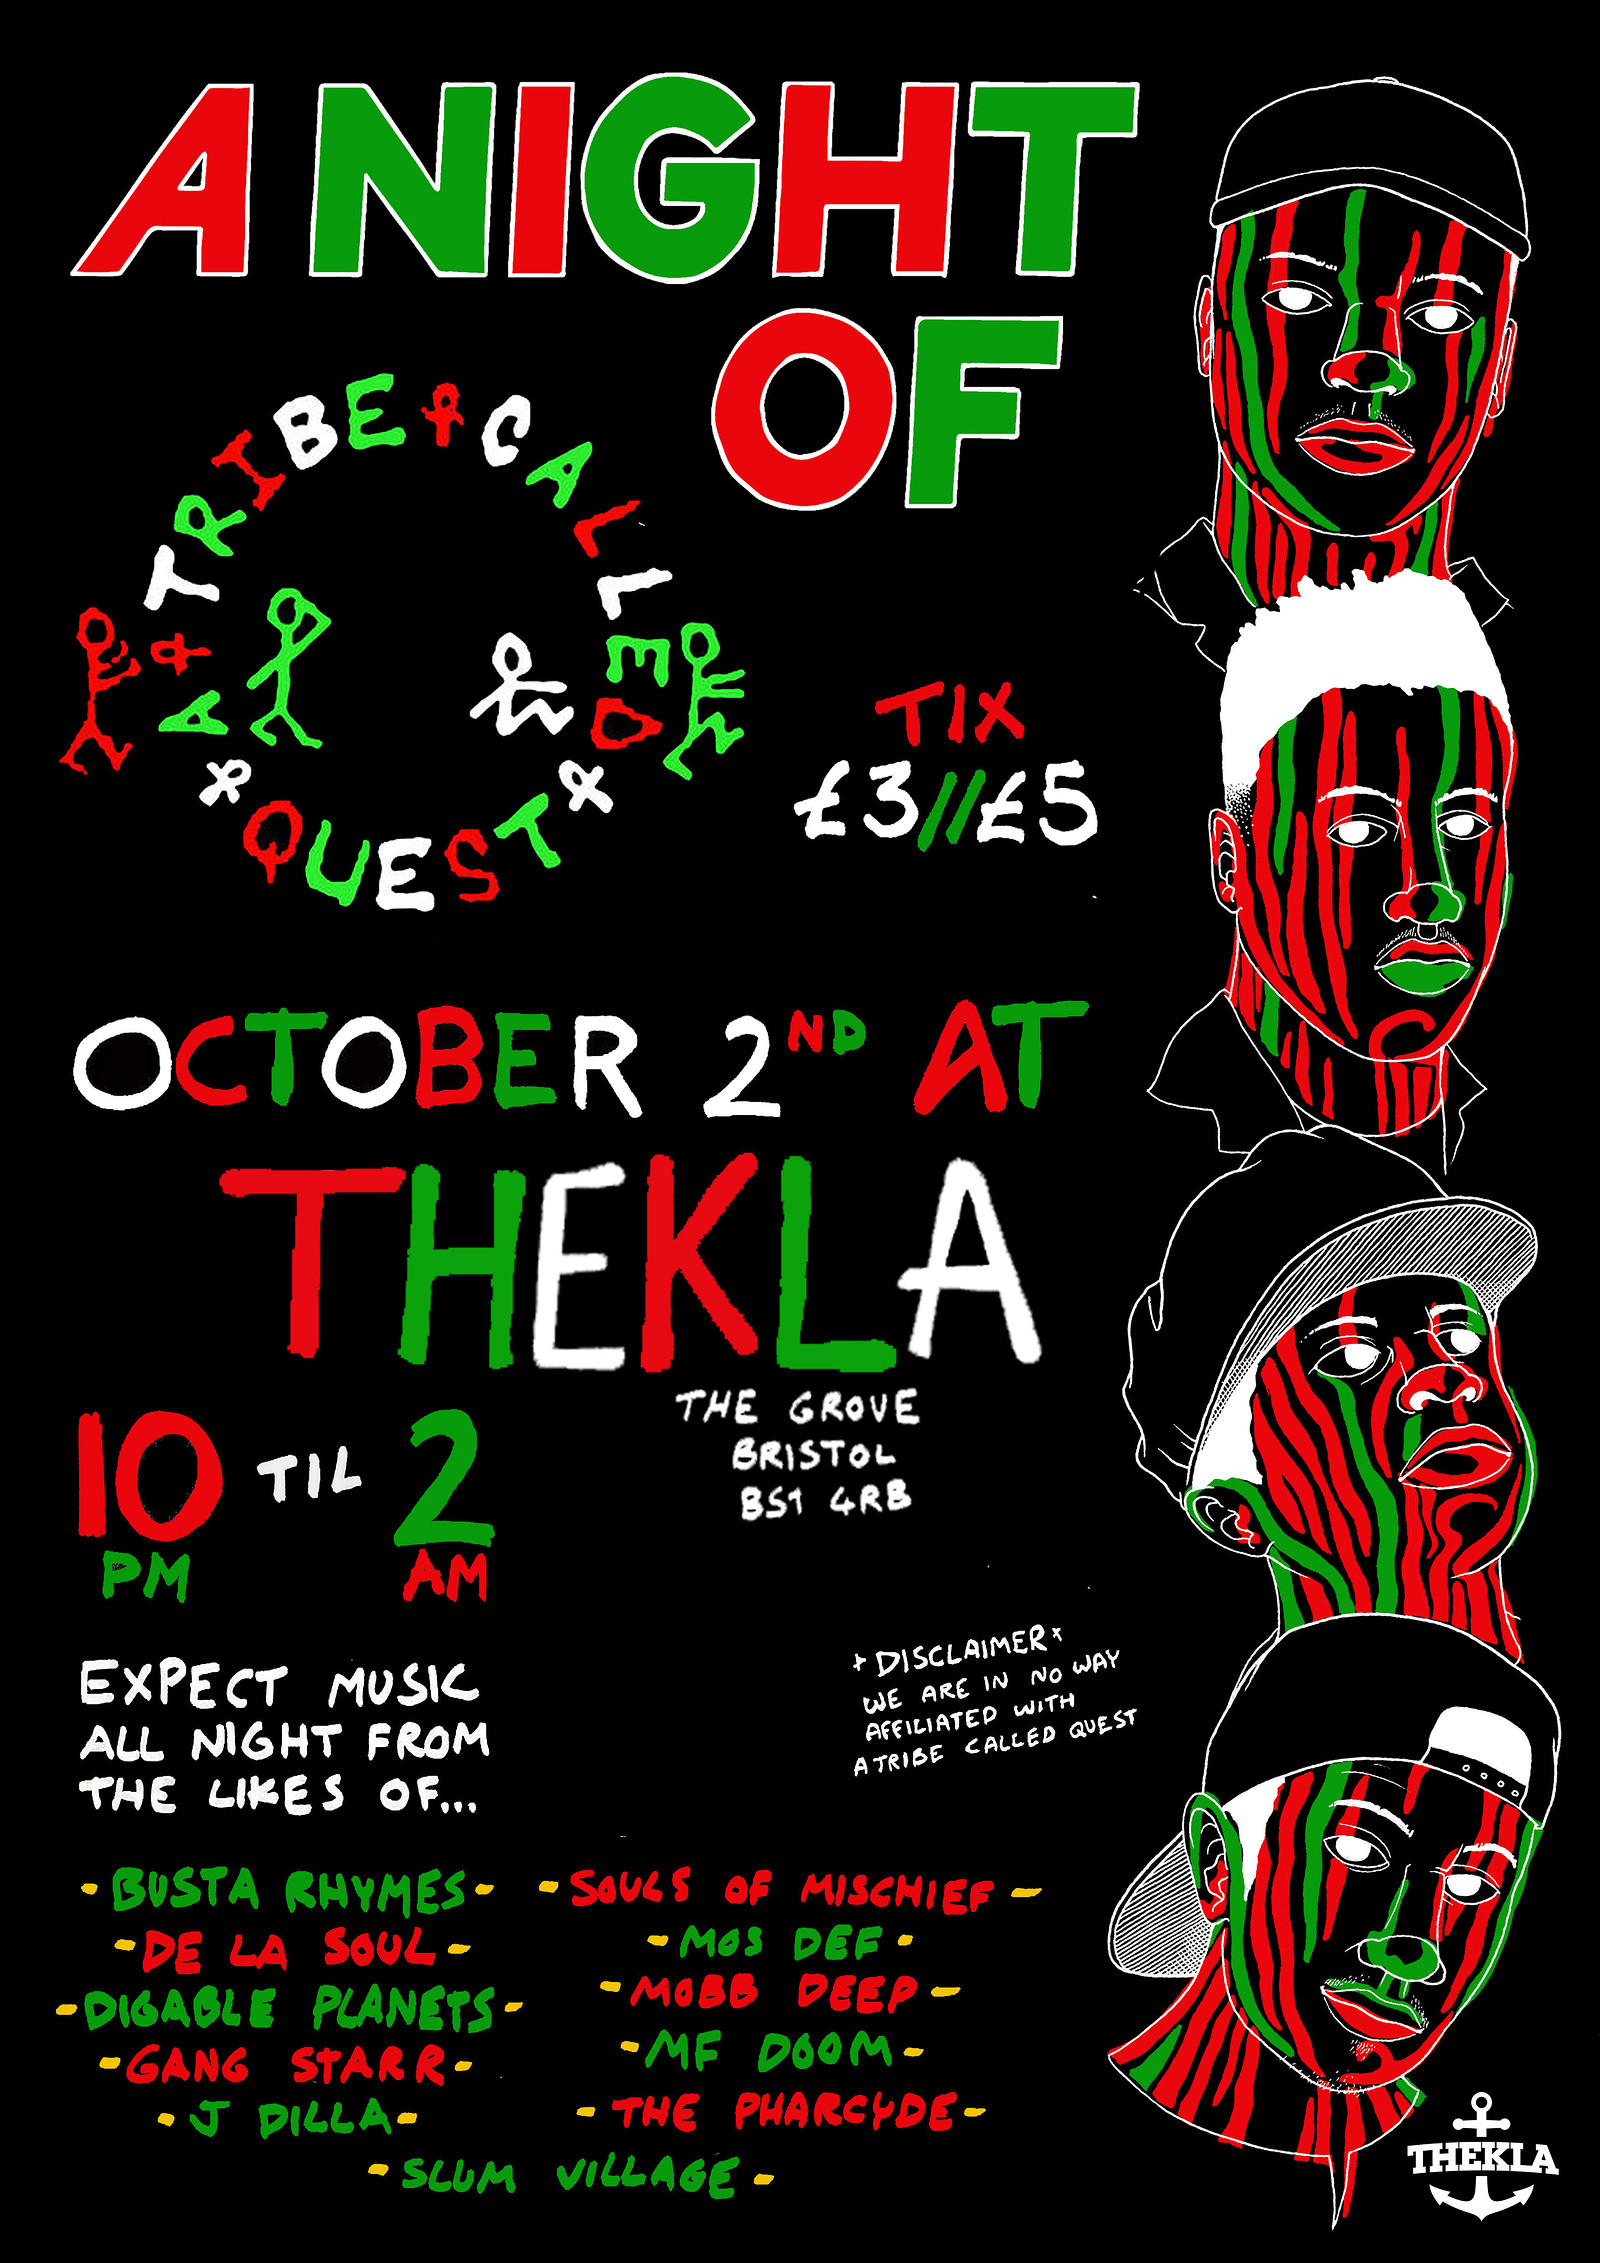 A Night Of: A Tribe Called Quest at Thekla